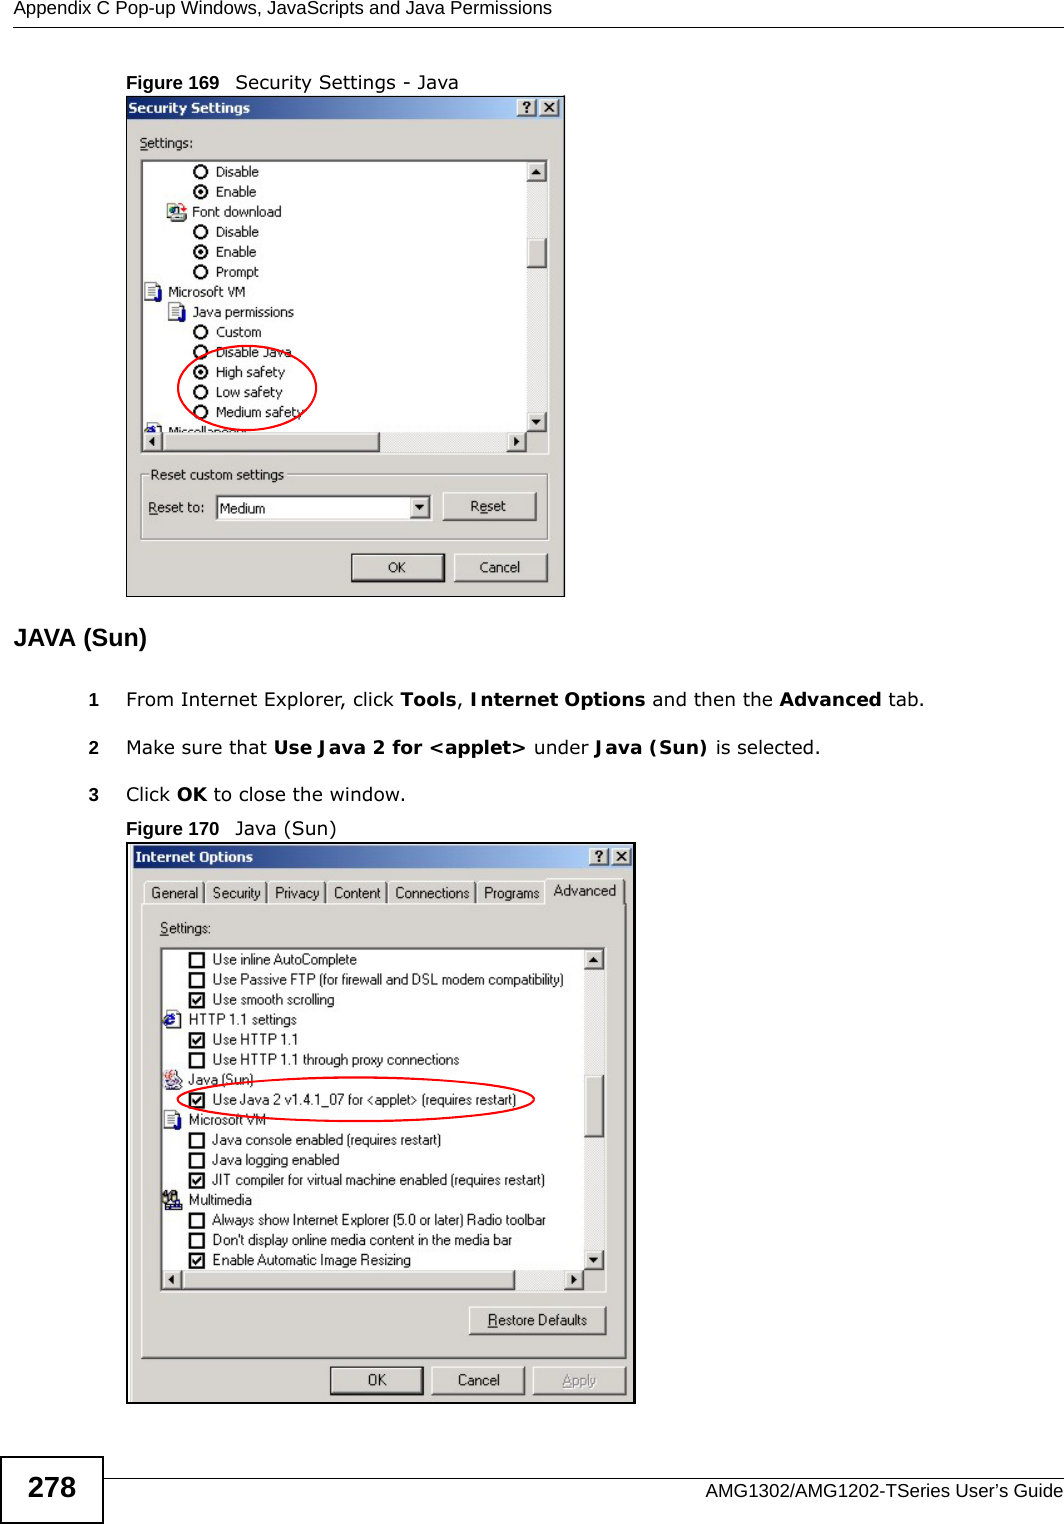 Appendix C Pop-up Windows, JavaScripts and Java PermissionsAMG1302/AMG1202-TSeries User’s Guide278Figure 169   Security Settings - Java JAVA (Sun)1From Internet Explorer, click Tools, Internet Options and then the Advanced tab. 2Make sure that Use Java 2 for &lt;applet&gt; under Java (Sun) is selected.3Click OK to close the window.Figure 170   Java (Sun)